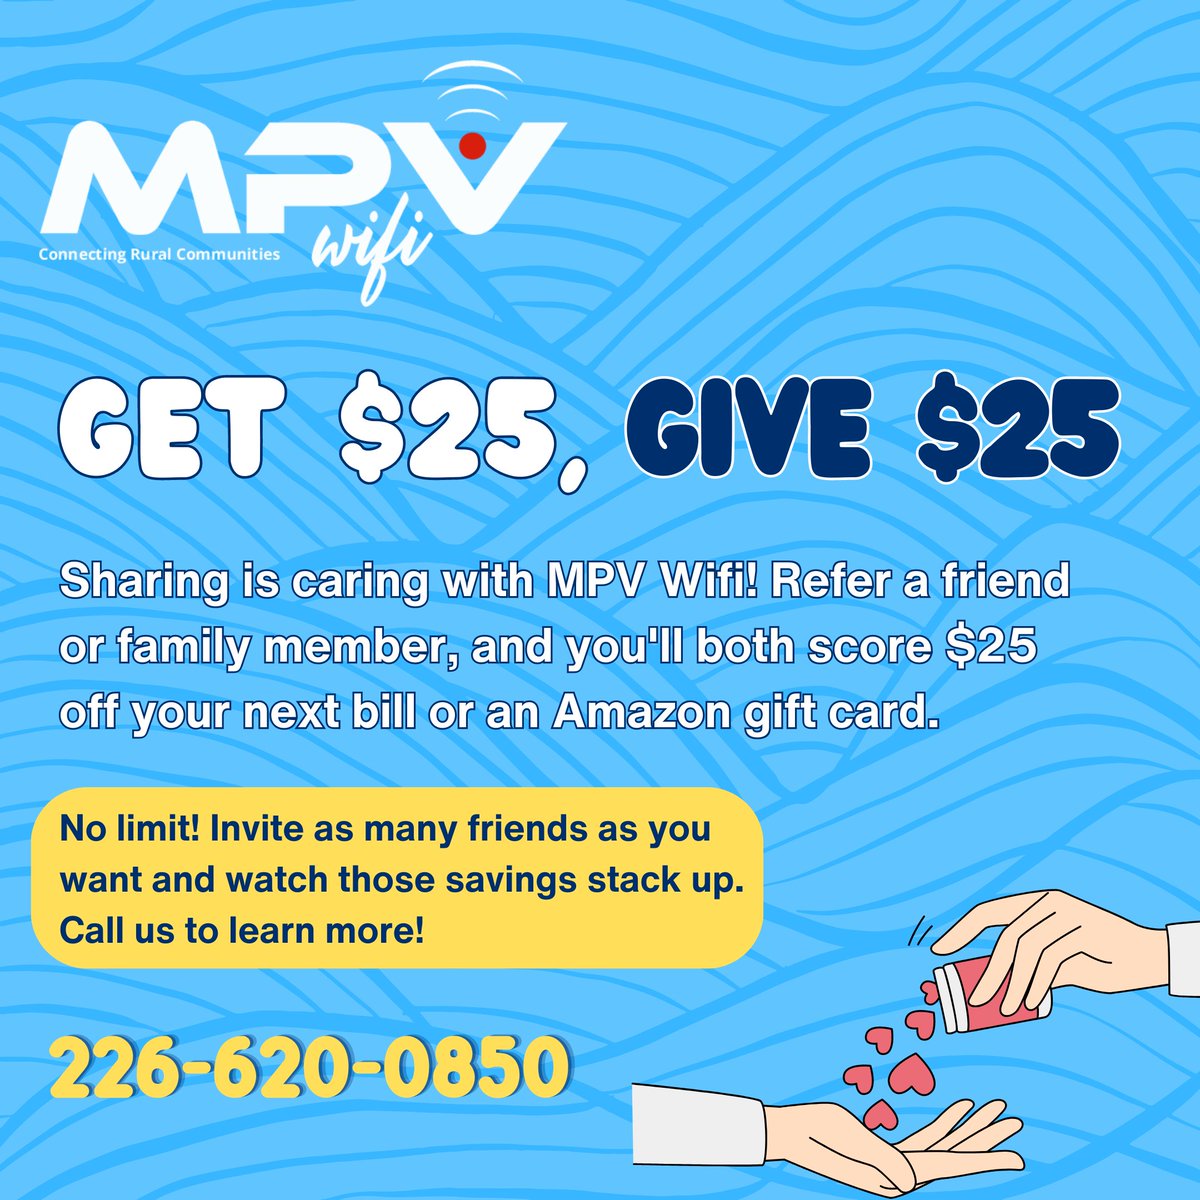 Exciting news! Share the magic of uninterrupted connectivity with our MPV WiFi Referral Program. Refer a friend to join us, and you both earn $25 off your next bill or an Amazon gift card. Stay connected and get rewarded! #MPVWiFi